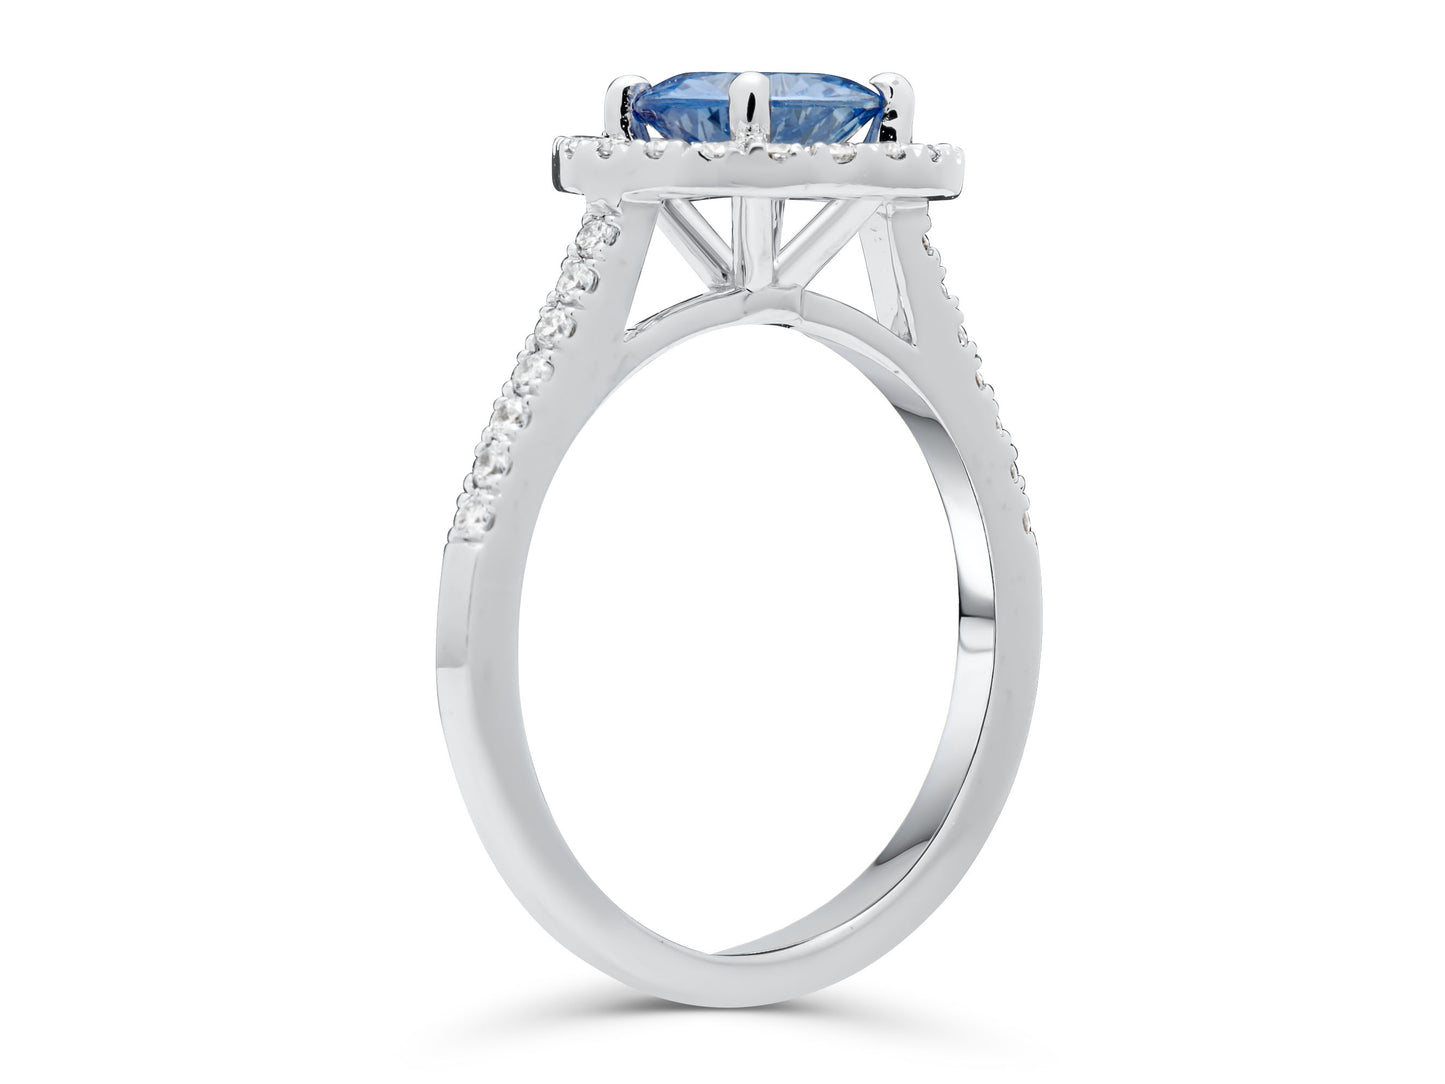 Sapphire White Gold Cocktail Ring